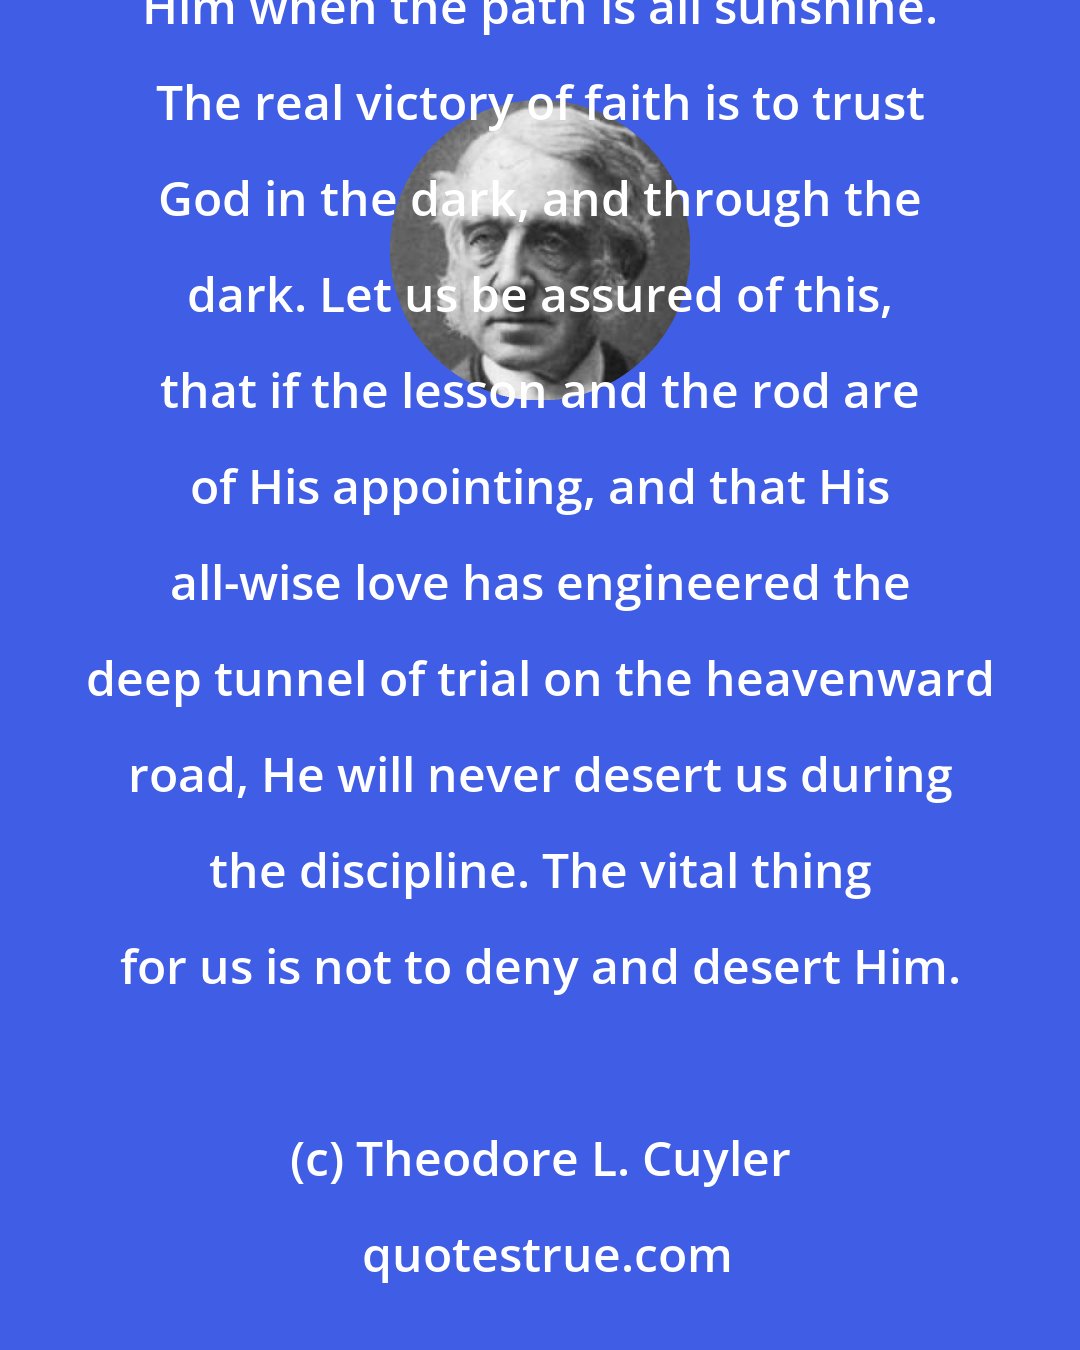 Theodore L. Cuyler: It is the easiest thing in the world for us to obey God when He commands us to do what we like, and to trust Him when the path is all sunshine. The real victory of faith is to trust God in the dark, and through the dark. Let us be assured of this, that if the lesson and the rod are of His appointing, and that His all-wise love has engineered the deep tunnel of trial on the heavenward road, He will never desert us during the discipline. The vital thing for us is not to deny and desert Him.